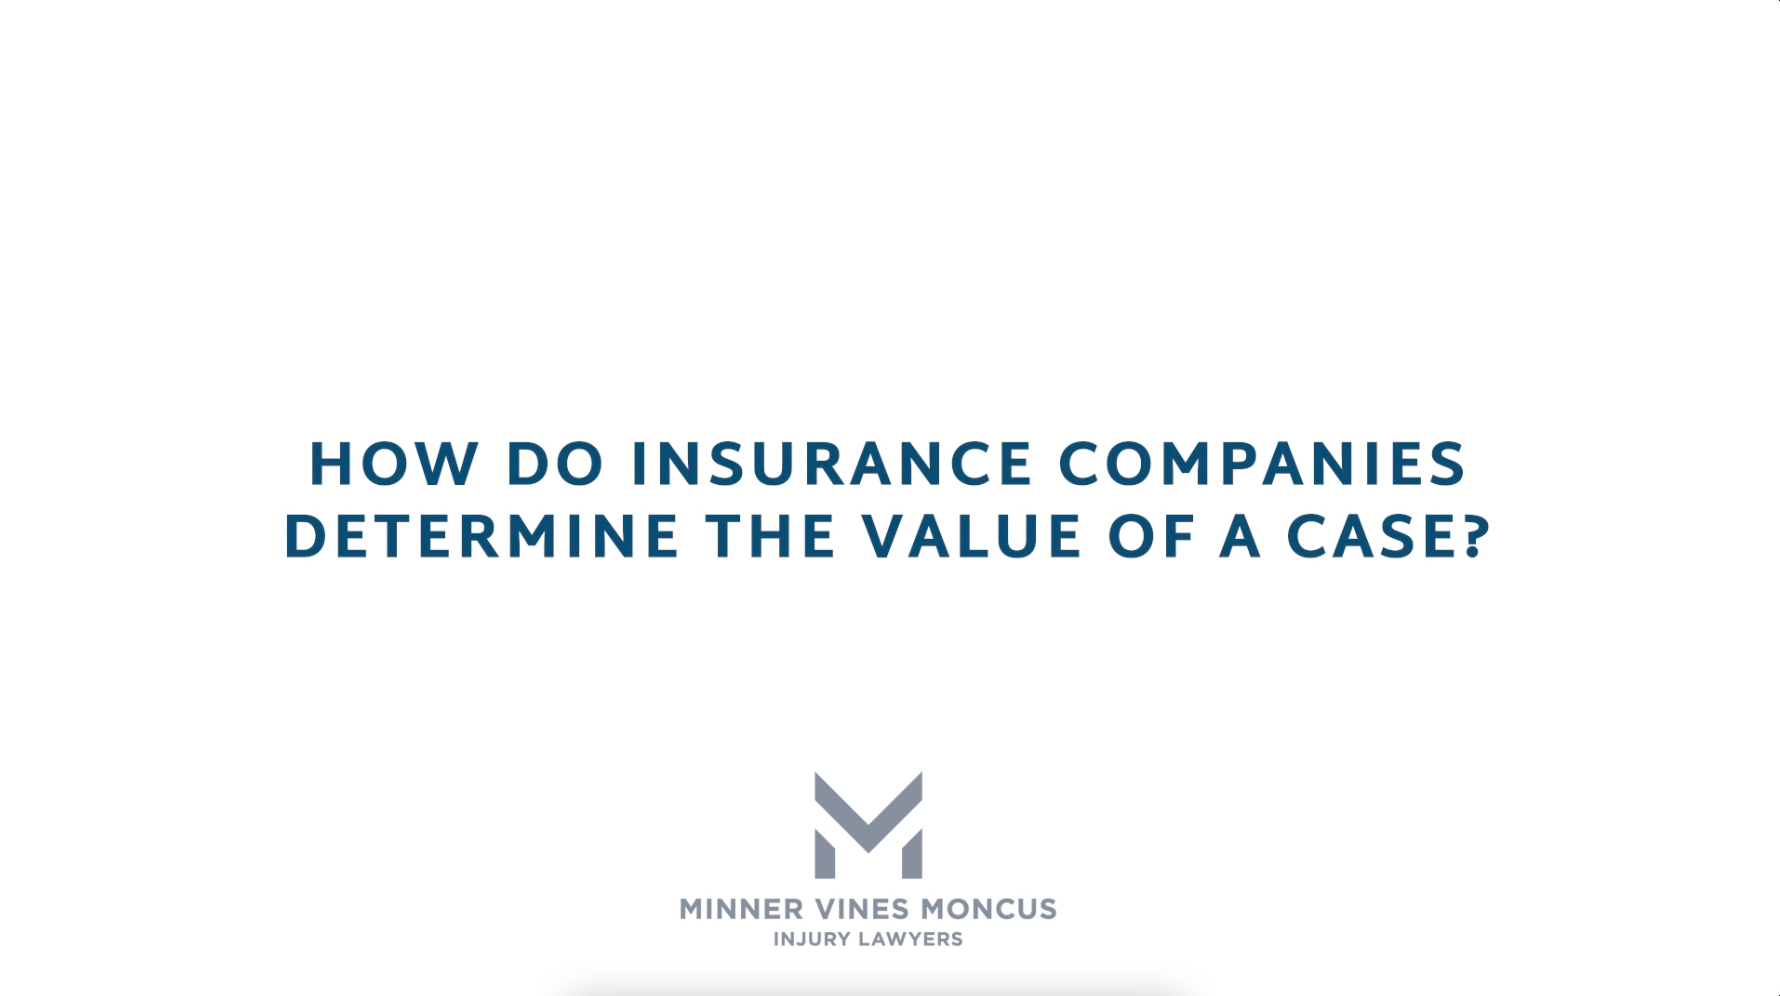 How do insurance companies determine the value of a case?